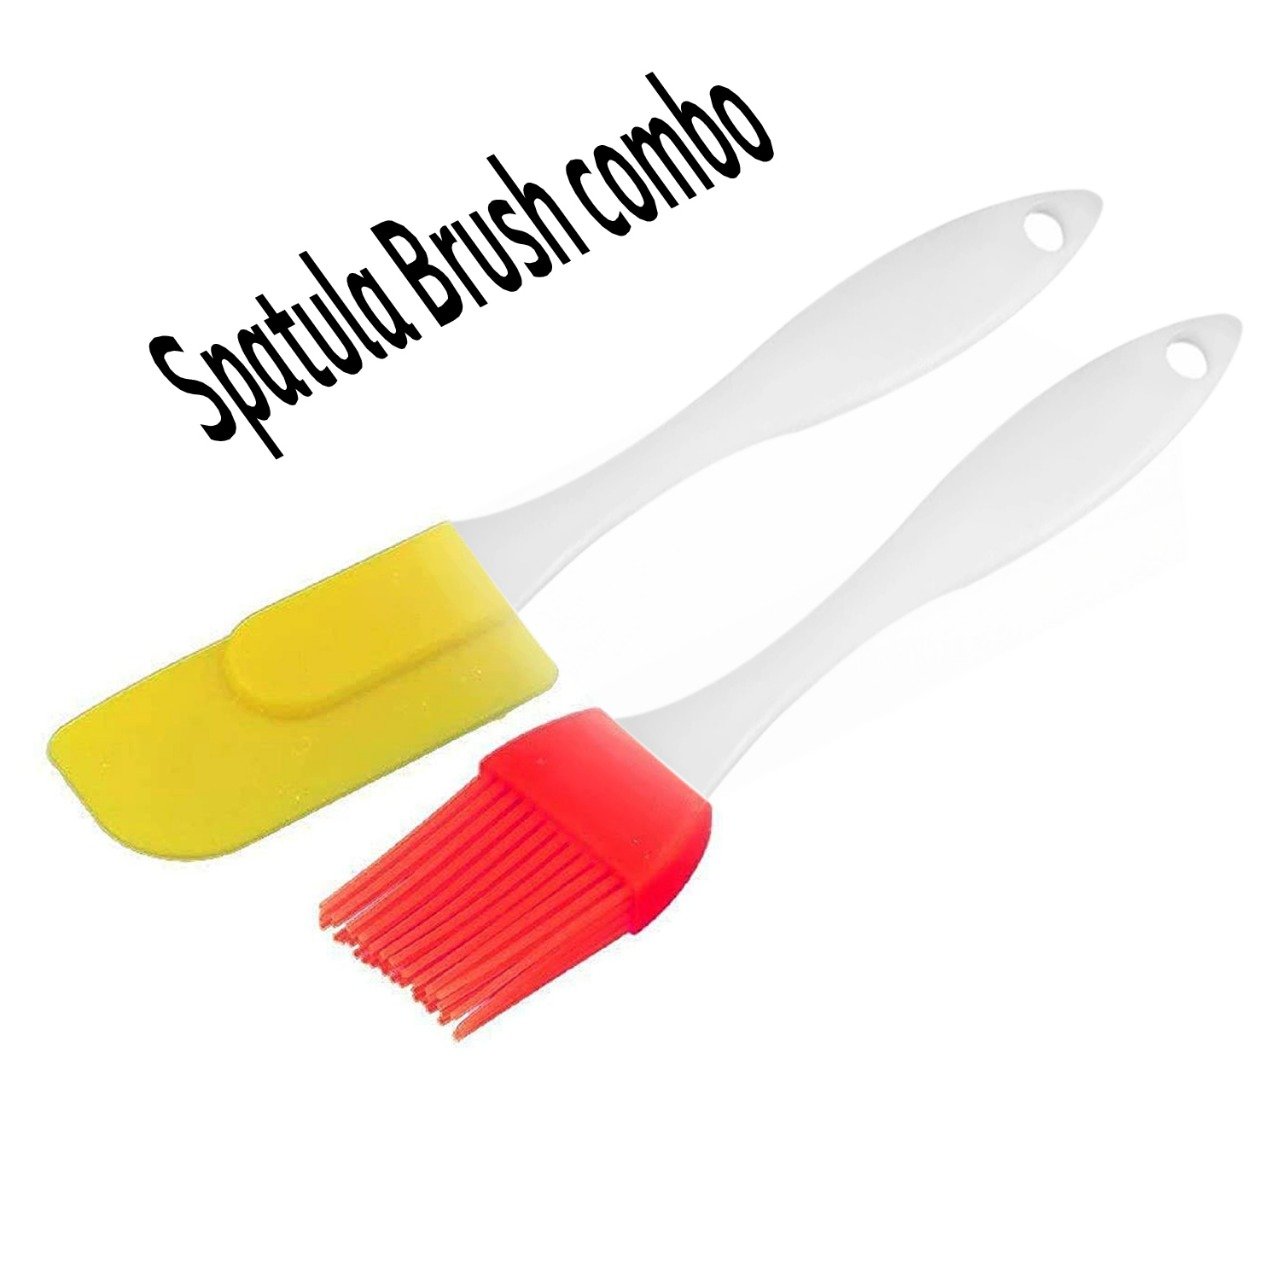 2170 spatula and pastry brush for cake mixer